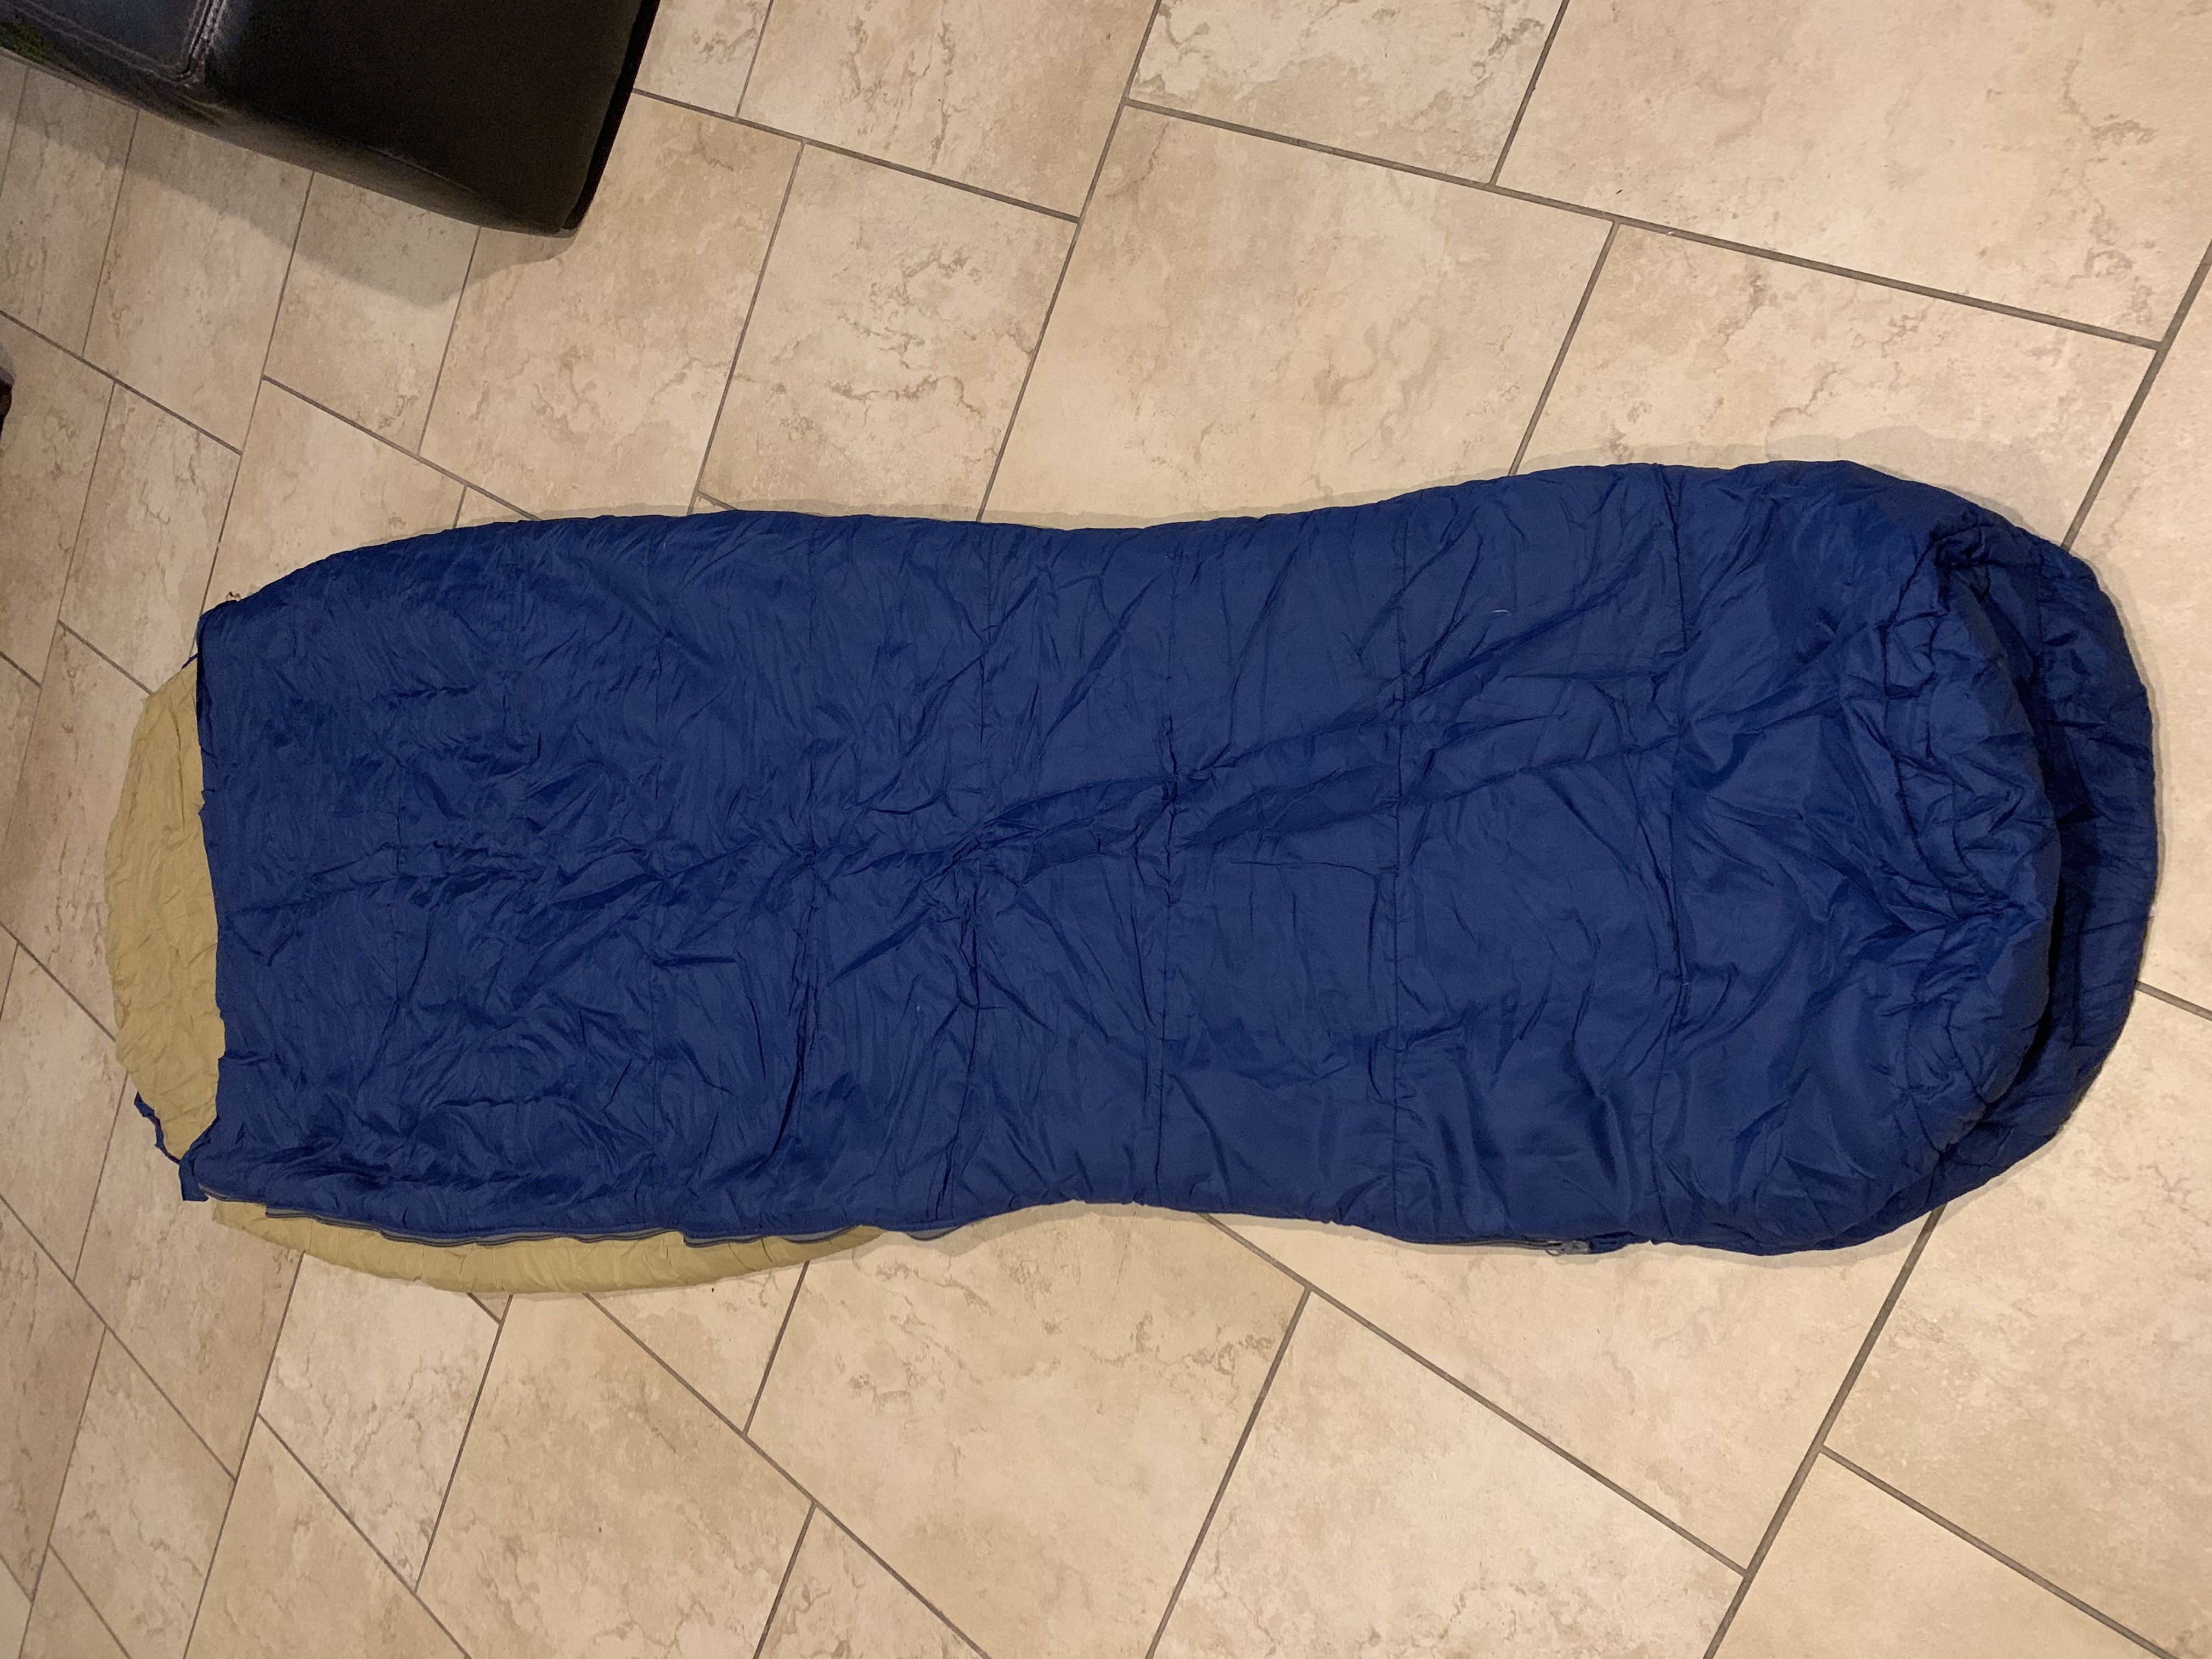 Sleeping bags - Classified Ads - CouesWhitetail.com Discussion forum